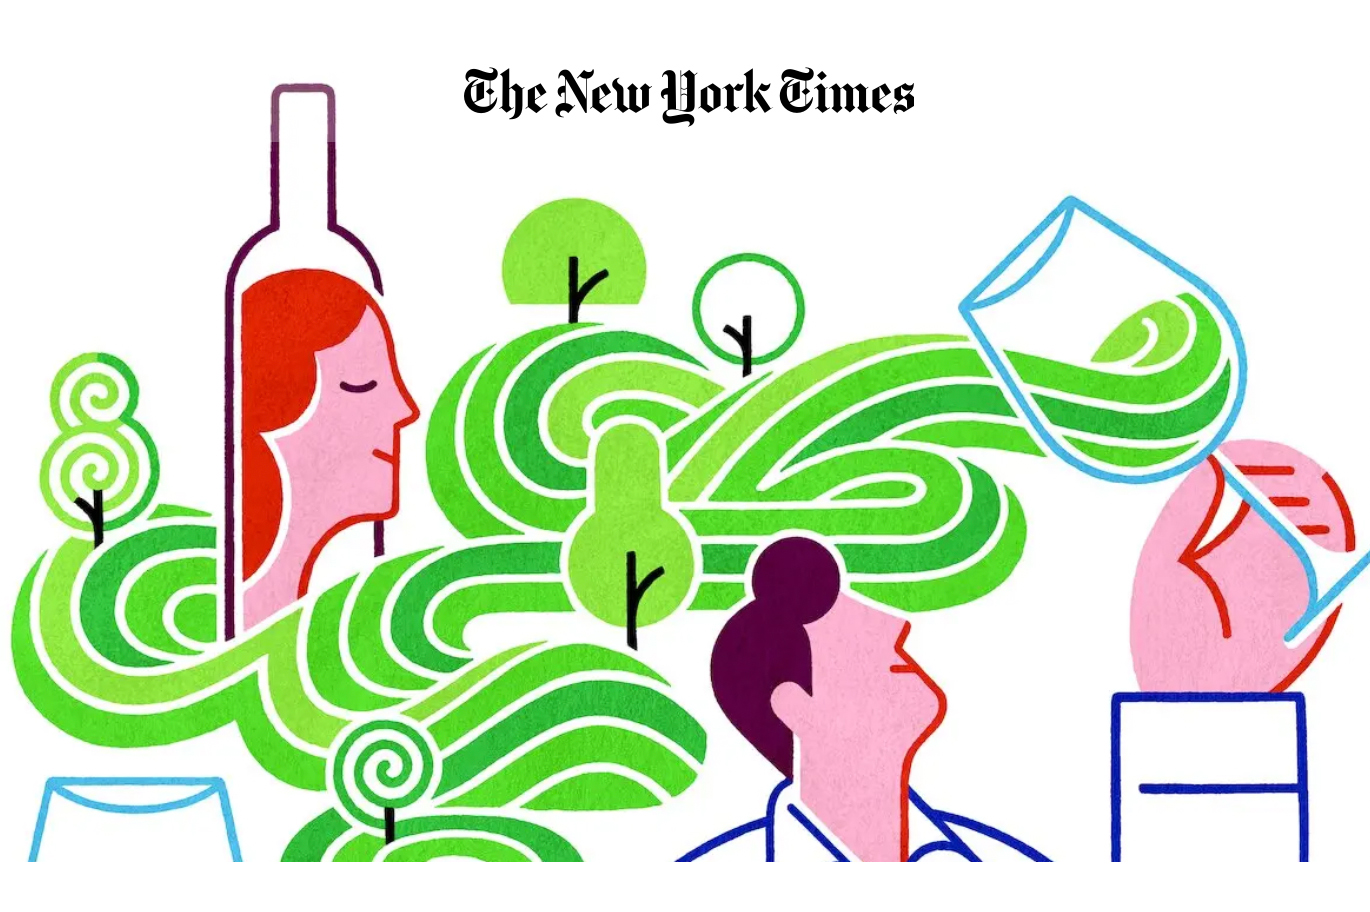 The New York Times - drawing of a woman's profile in a sketch of a wine bottle, and a man swirling wine in a glass. With hills and trees.